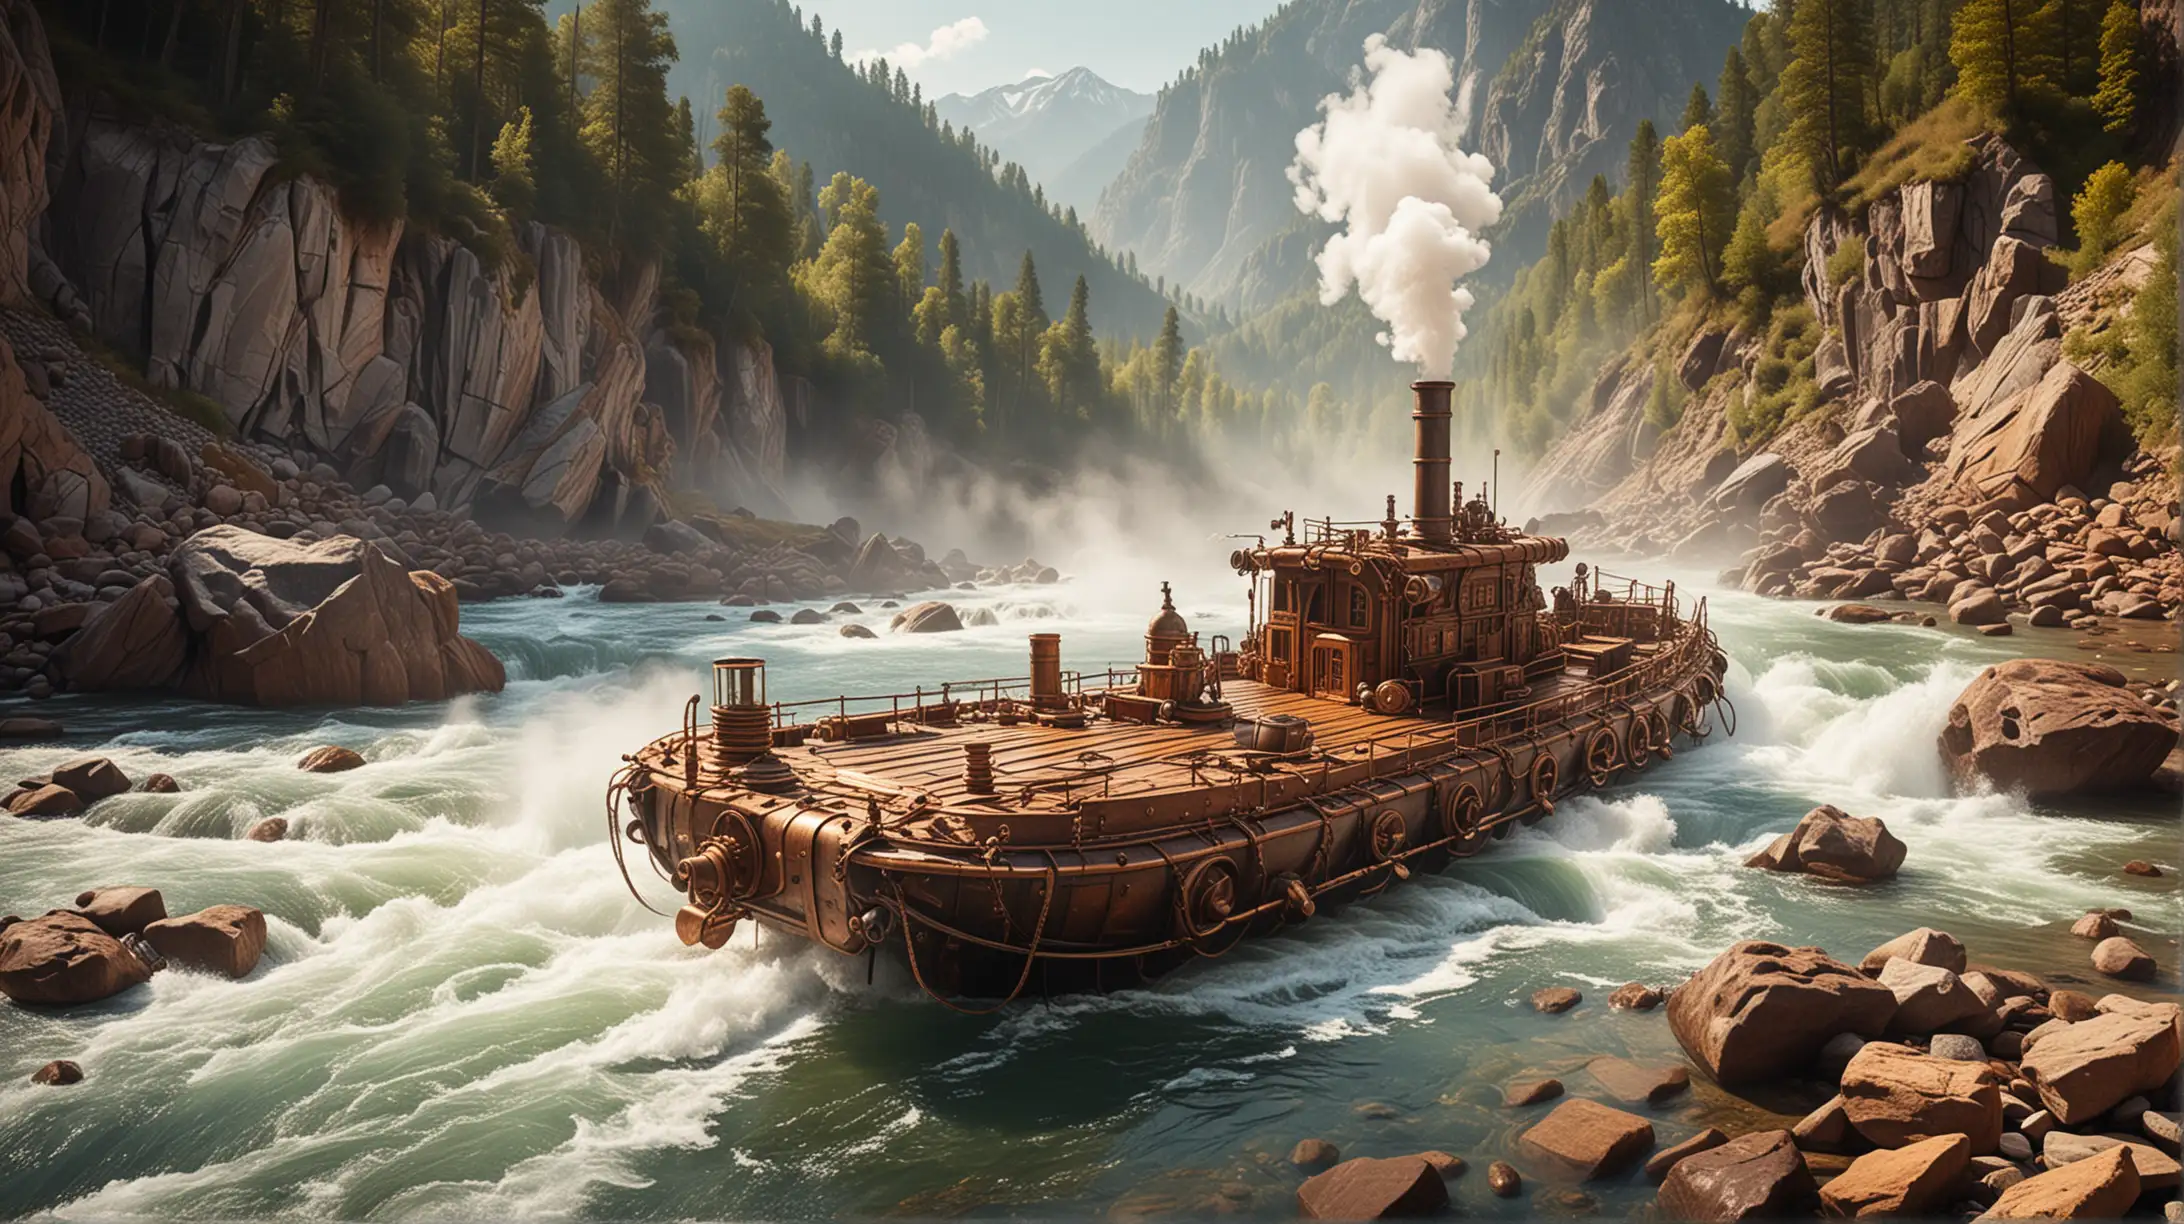 Steampunk Wooden Raft Floating on Wild Mountain River